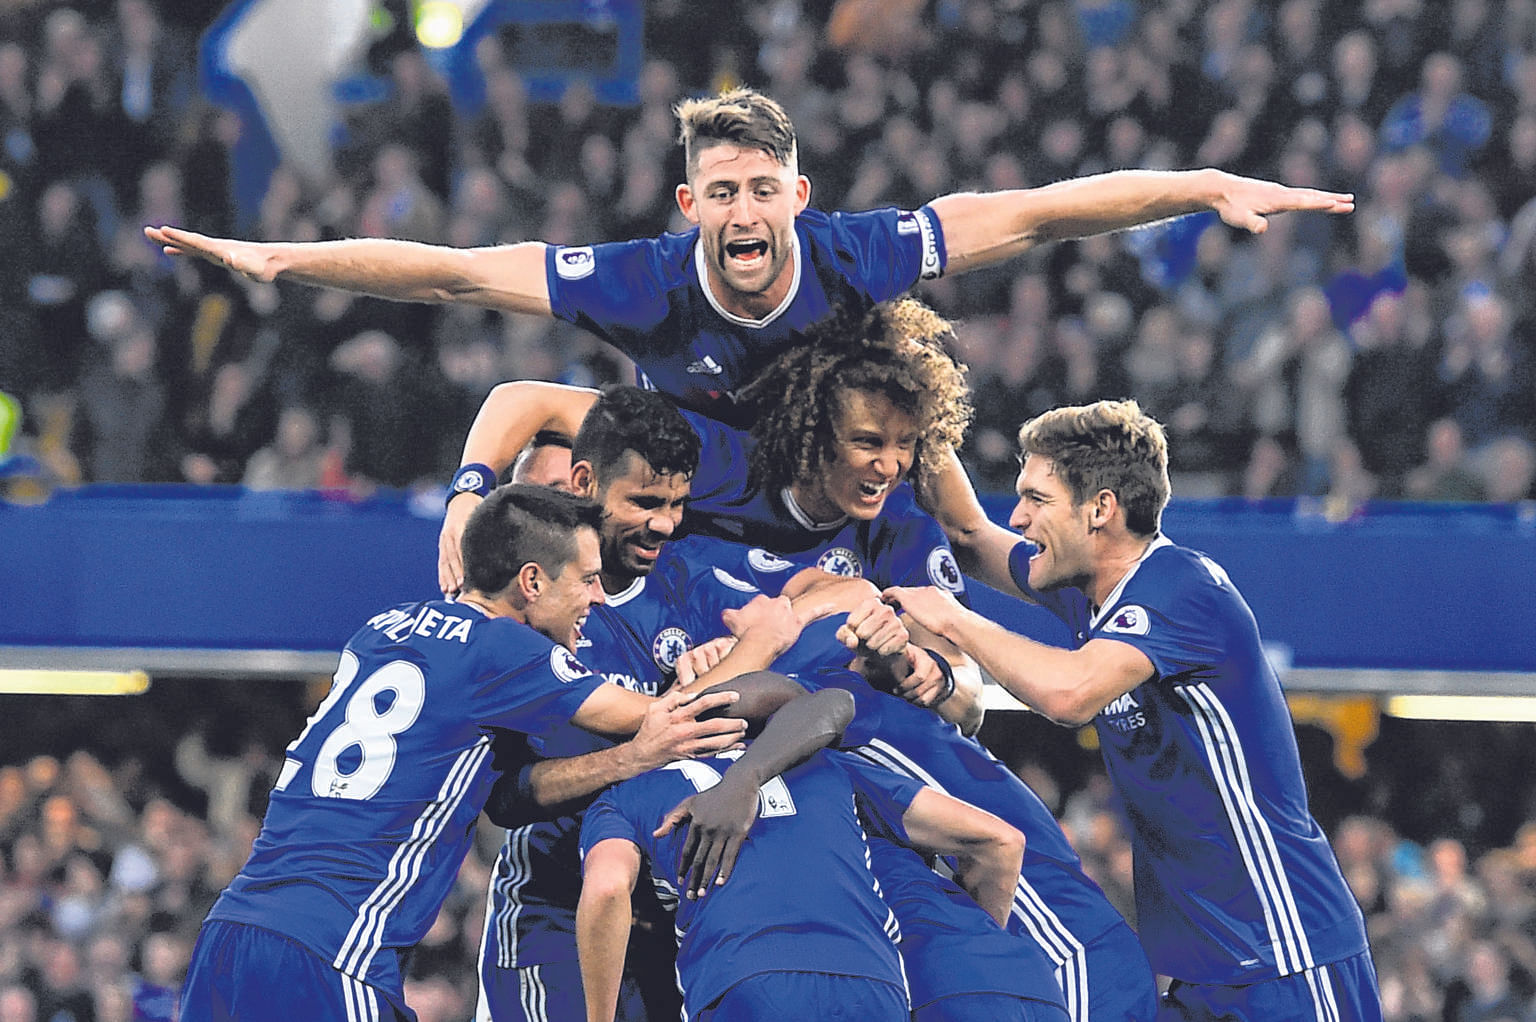 Chelsea's switch to a back three, along with a few personnel changes, have given them a fluency evinced by five wins on the trot.